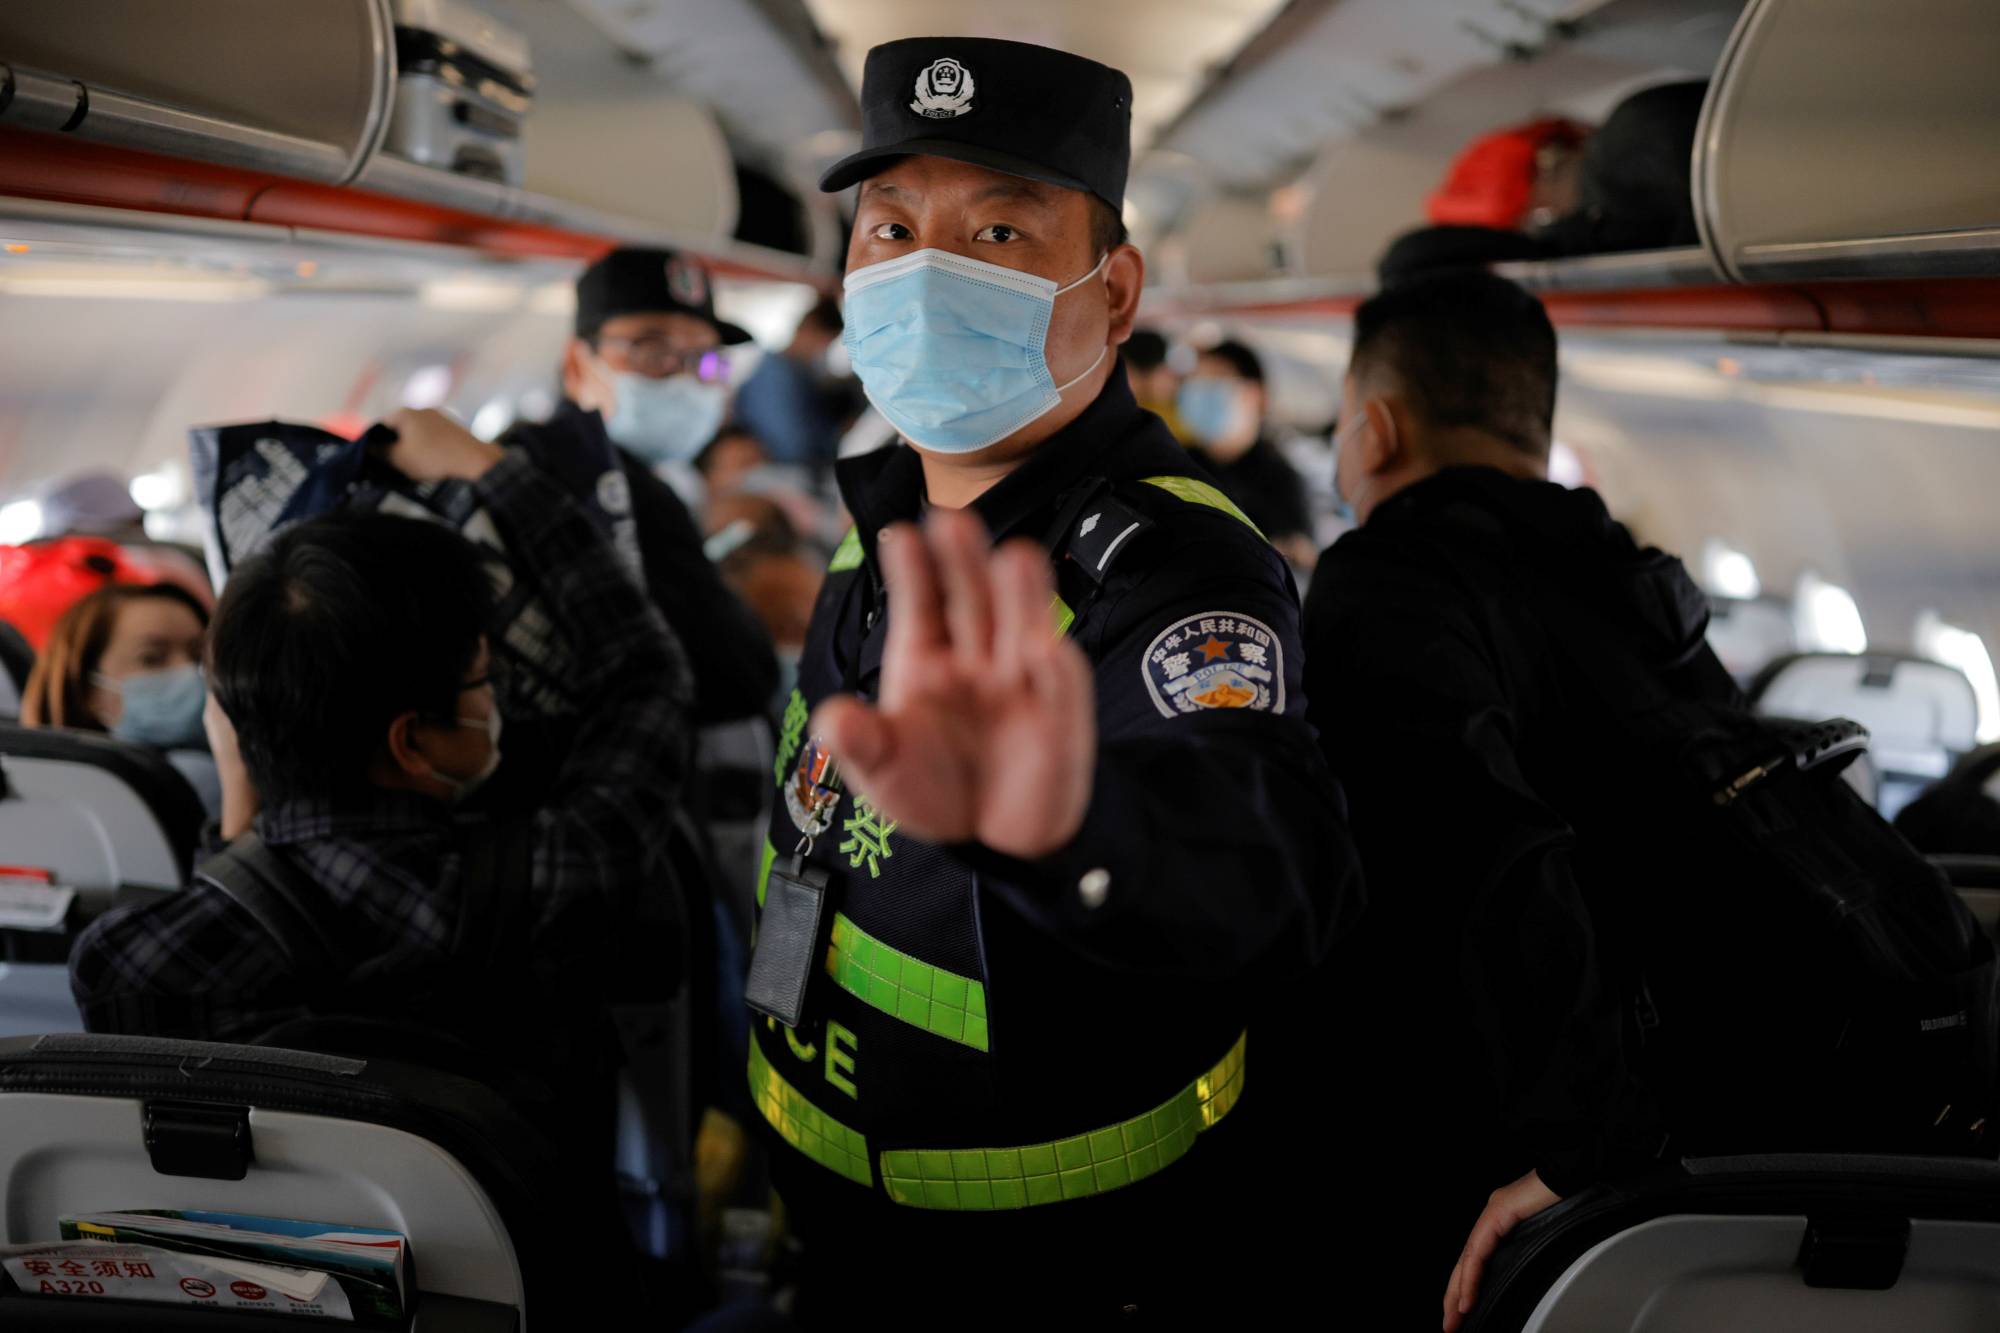 A police officer orders journalists off a plane before all other passengers without explanation while the aircraft is parked on the tarmac at Urumqi airport, Xinjiang Uyghur Autonomous Region, China, on May 5. | REUTERS